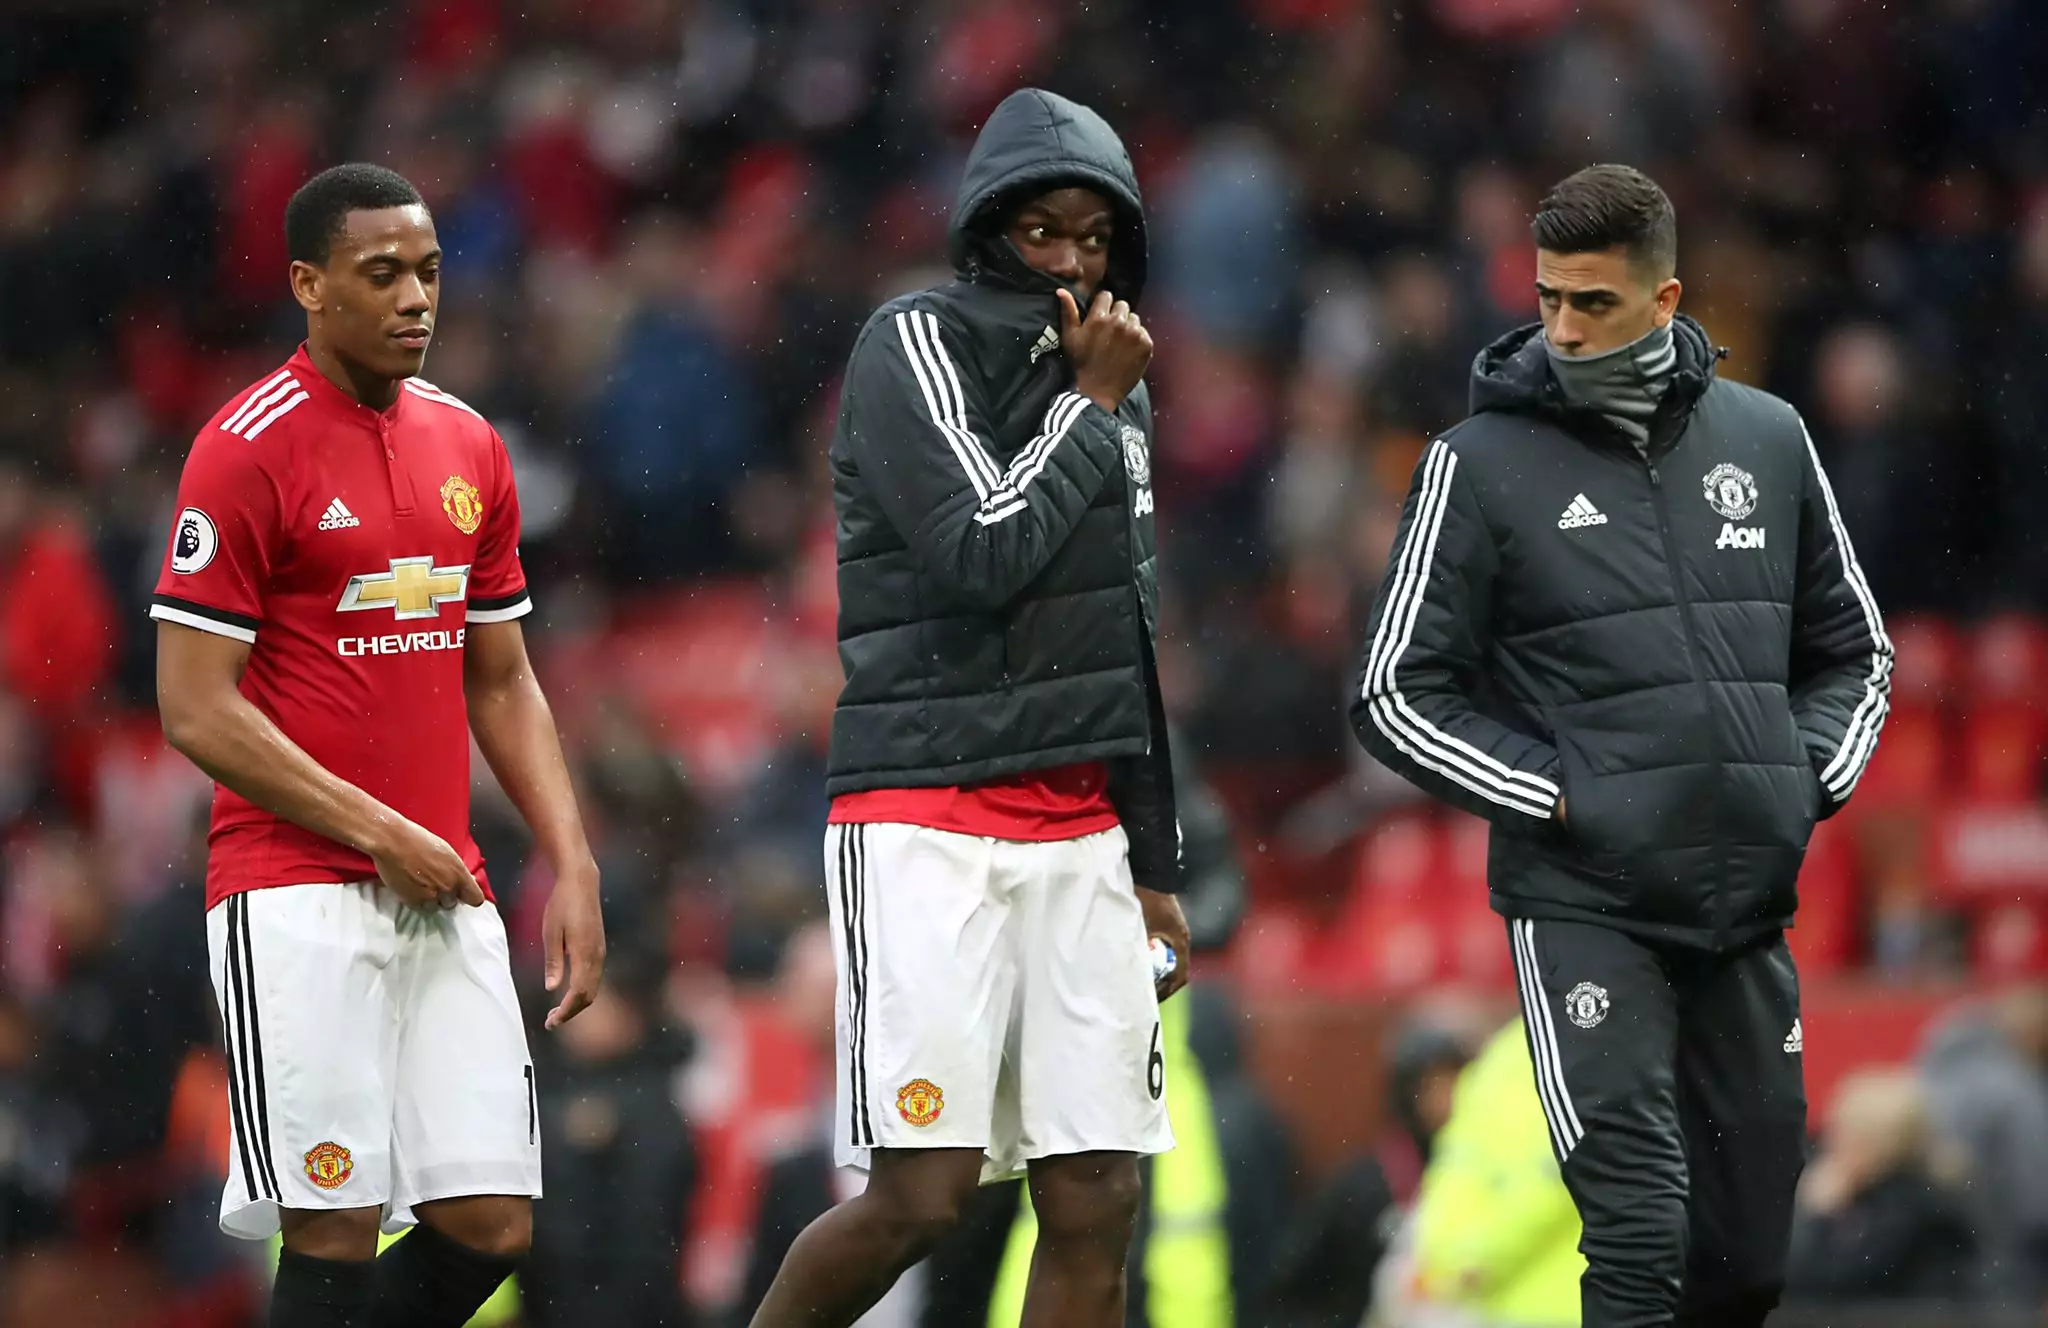 United players cut a dejected figure. Image: PA